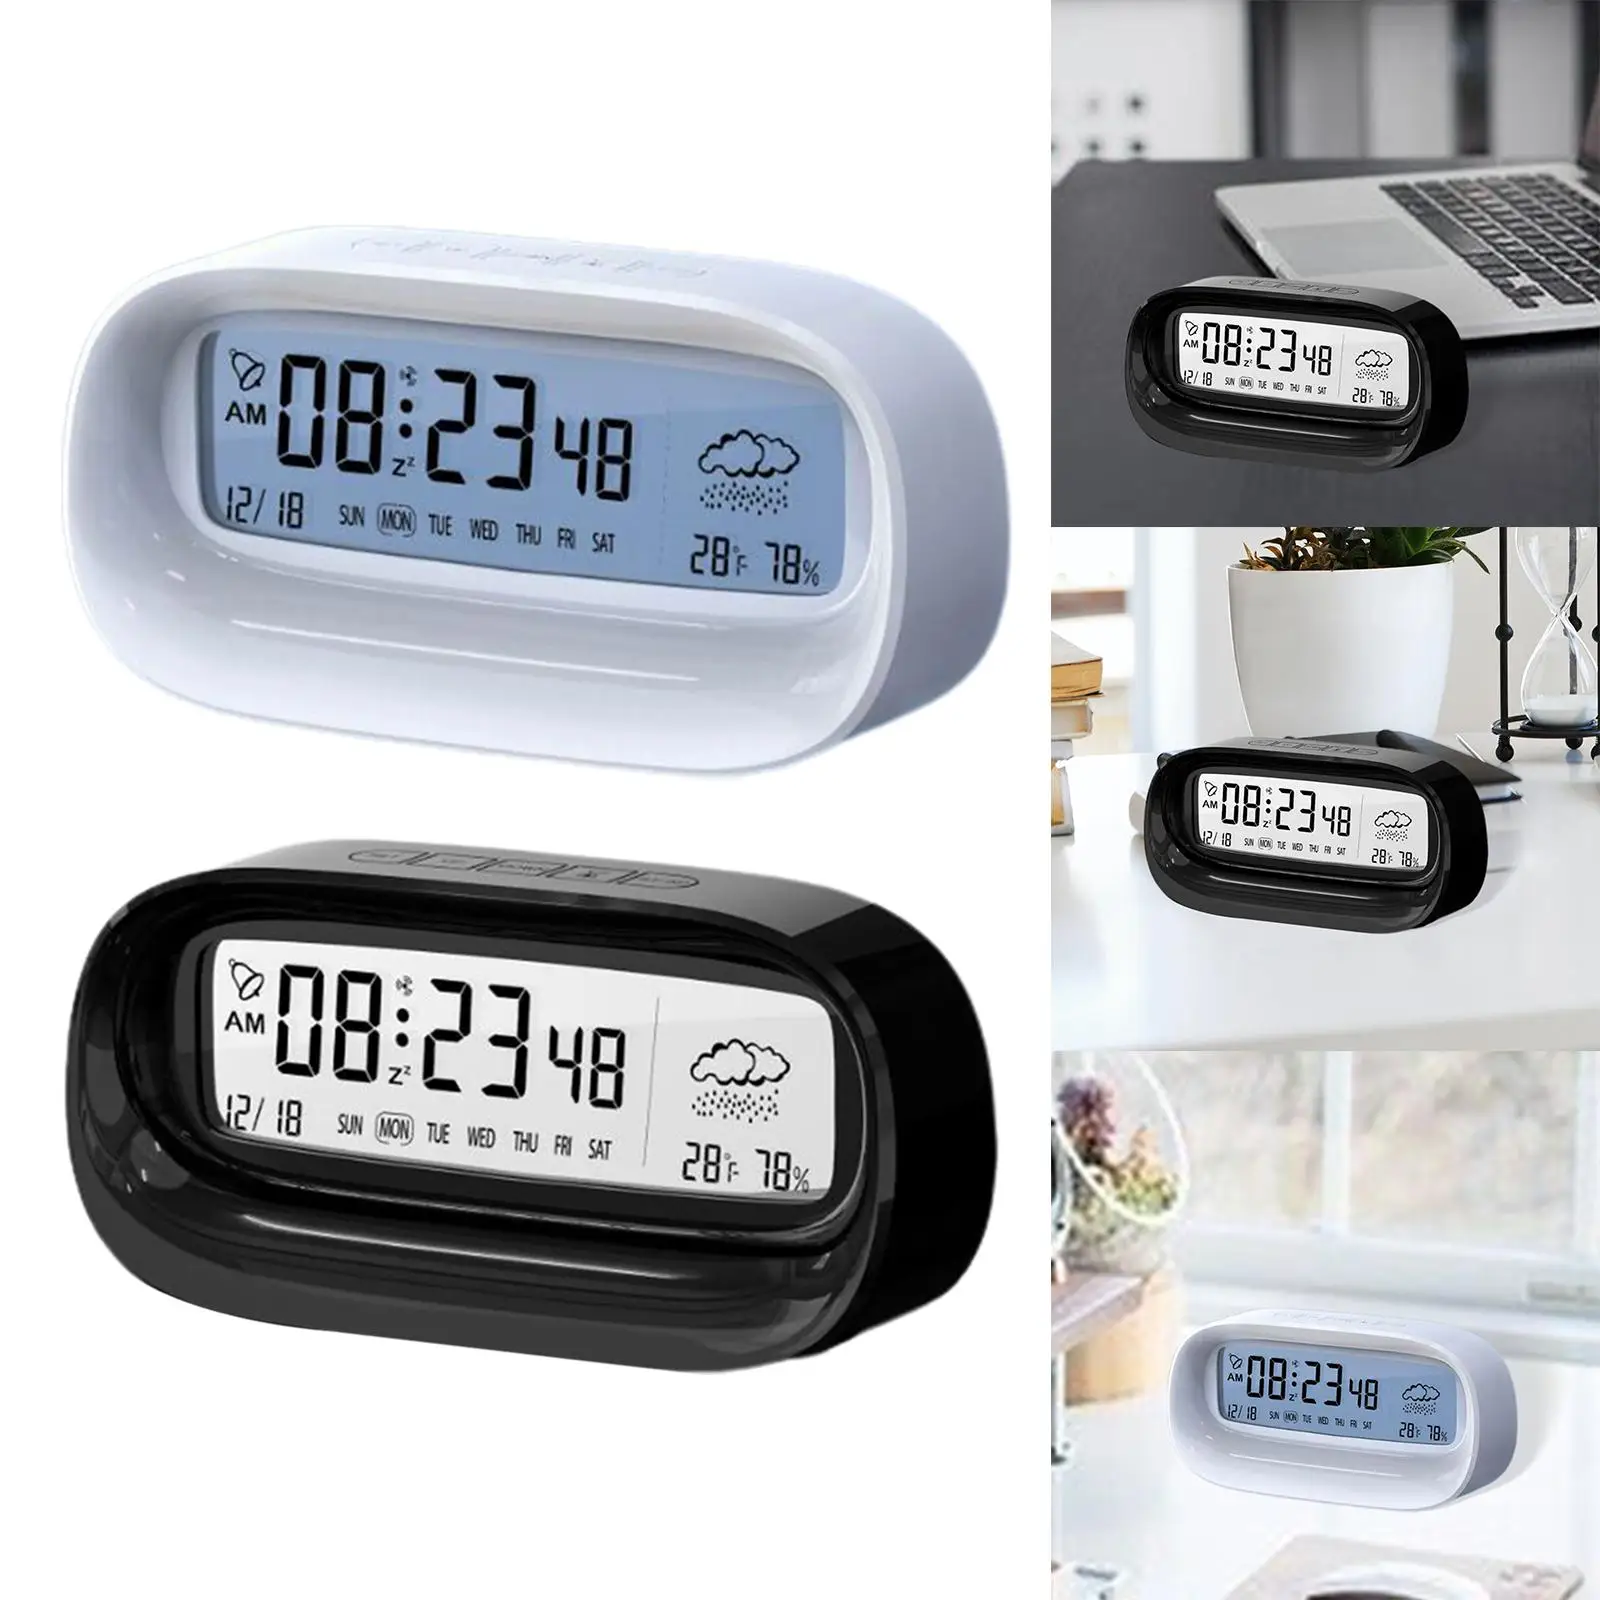 Desk Digital Alarm Clock with Date, Time and Week for Home Decoration